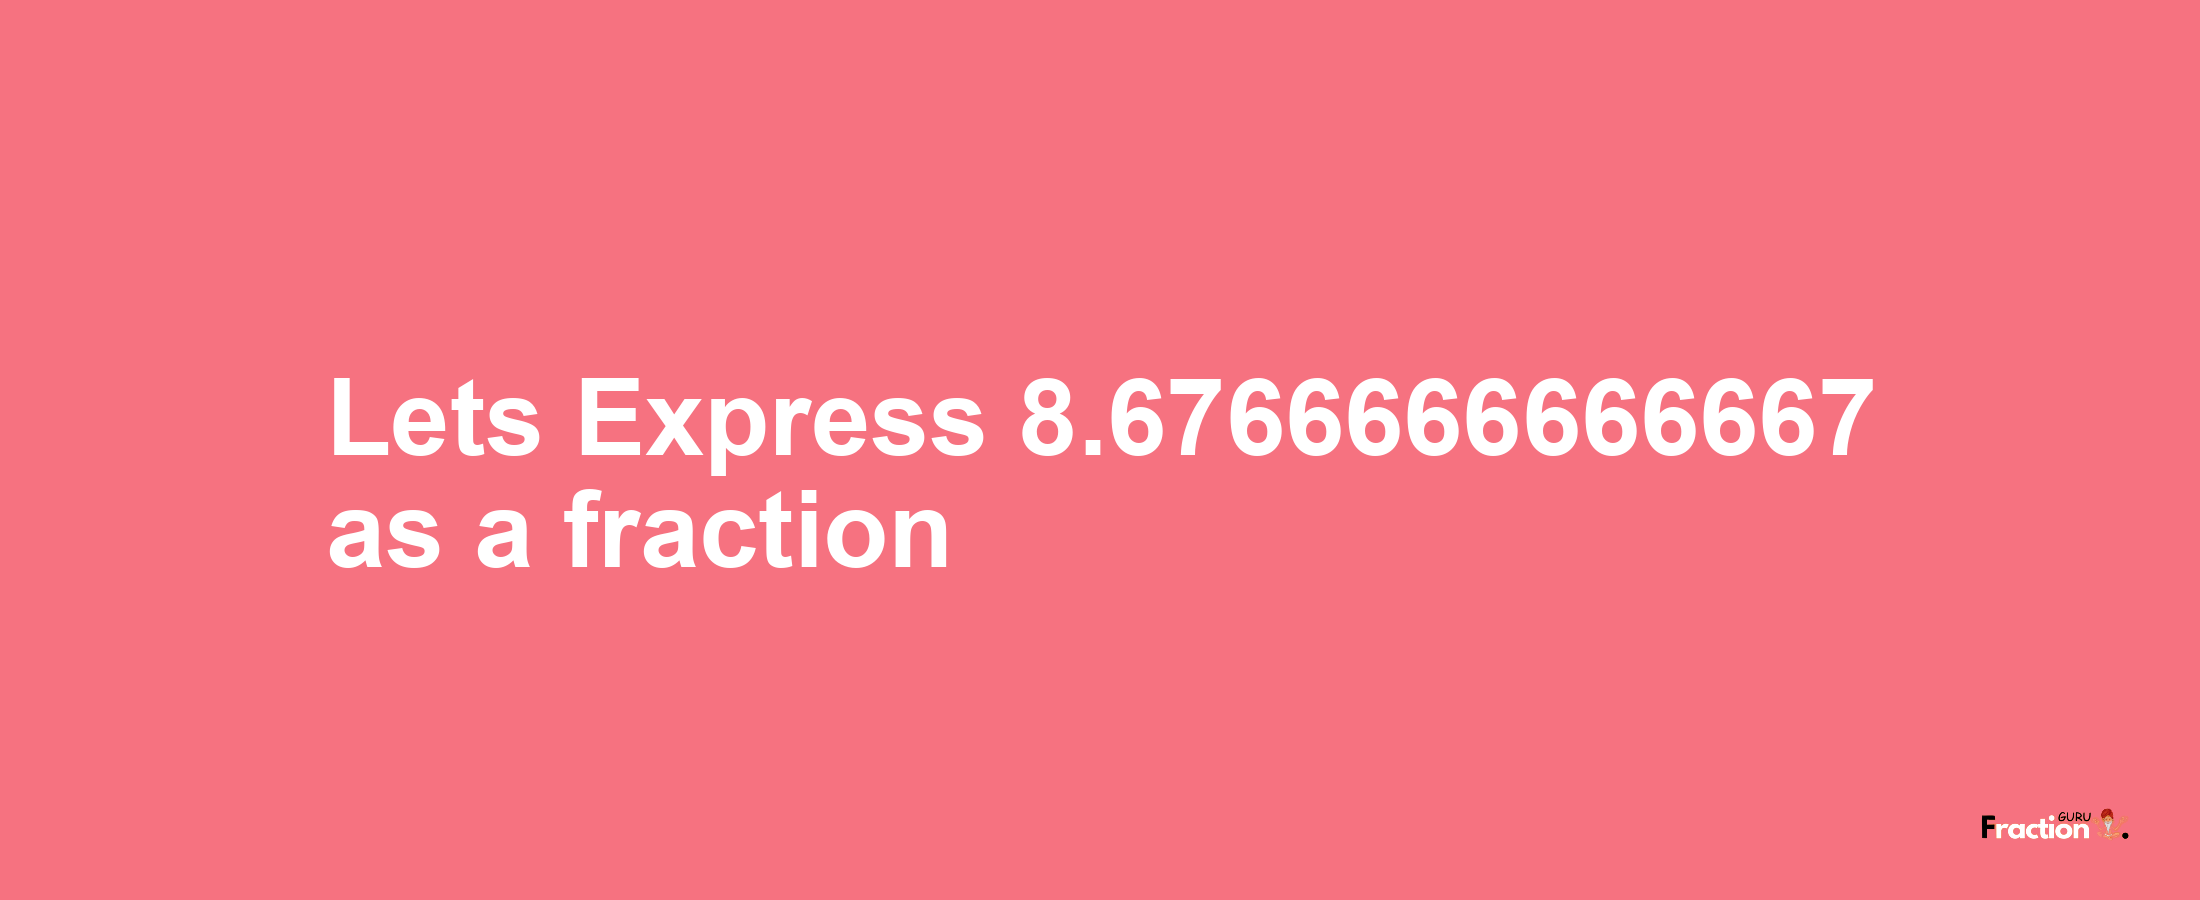 Lets Express 8.6766666666667 as afraction